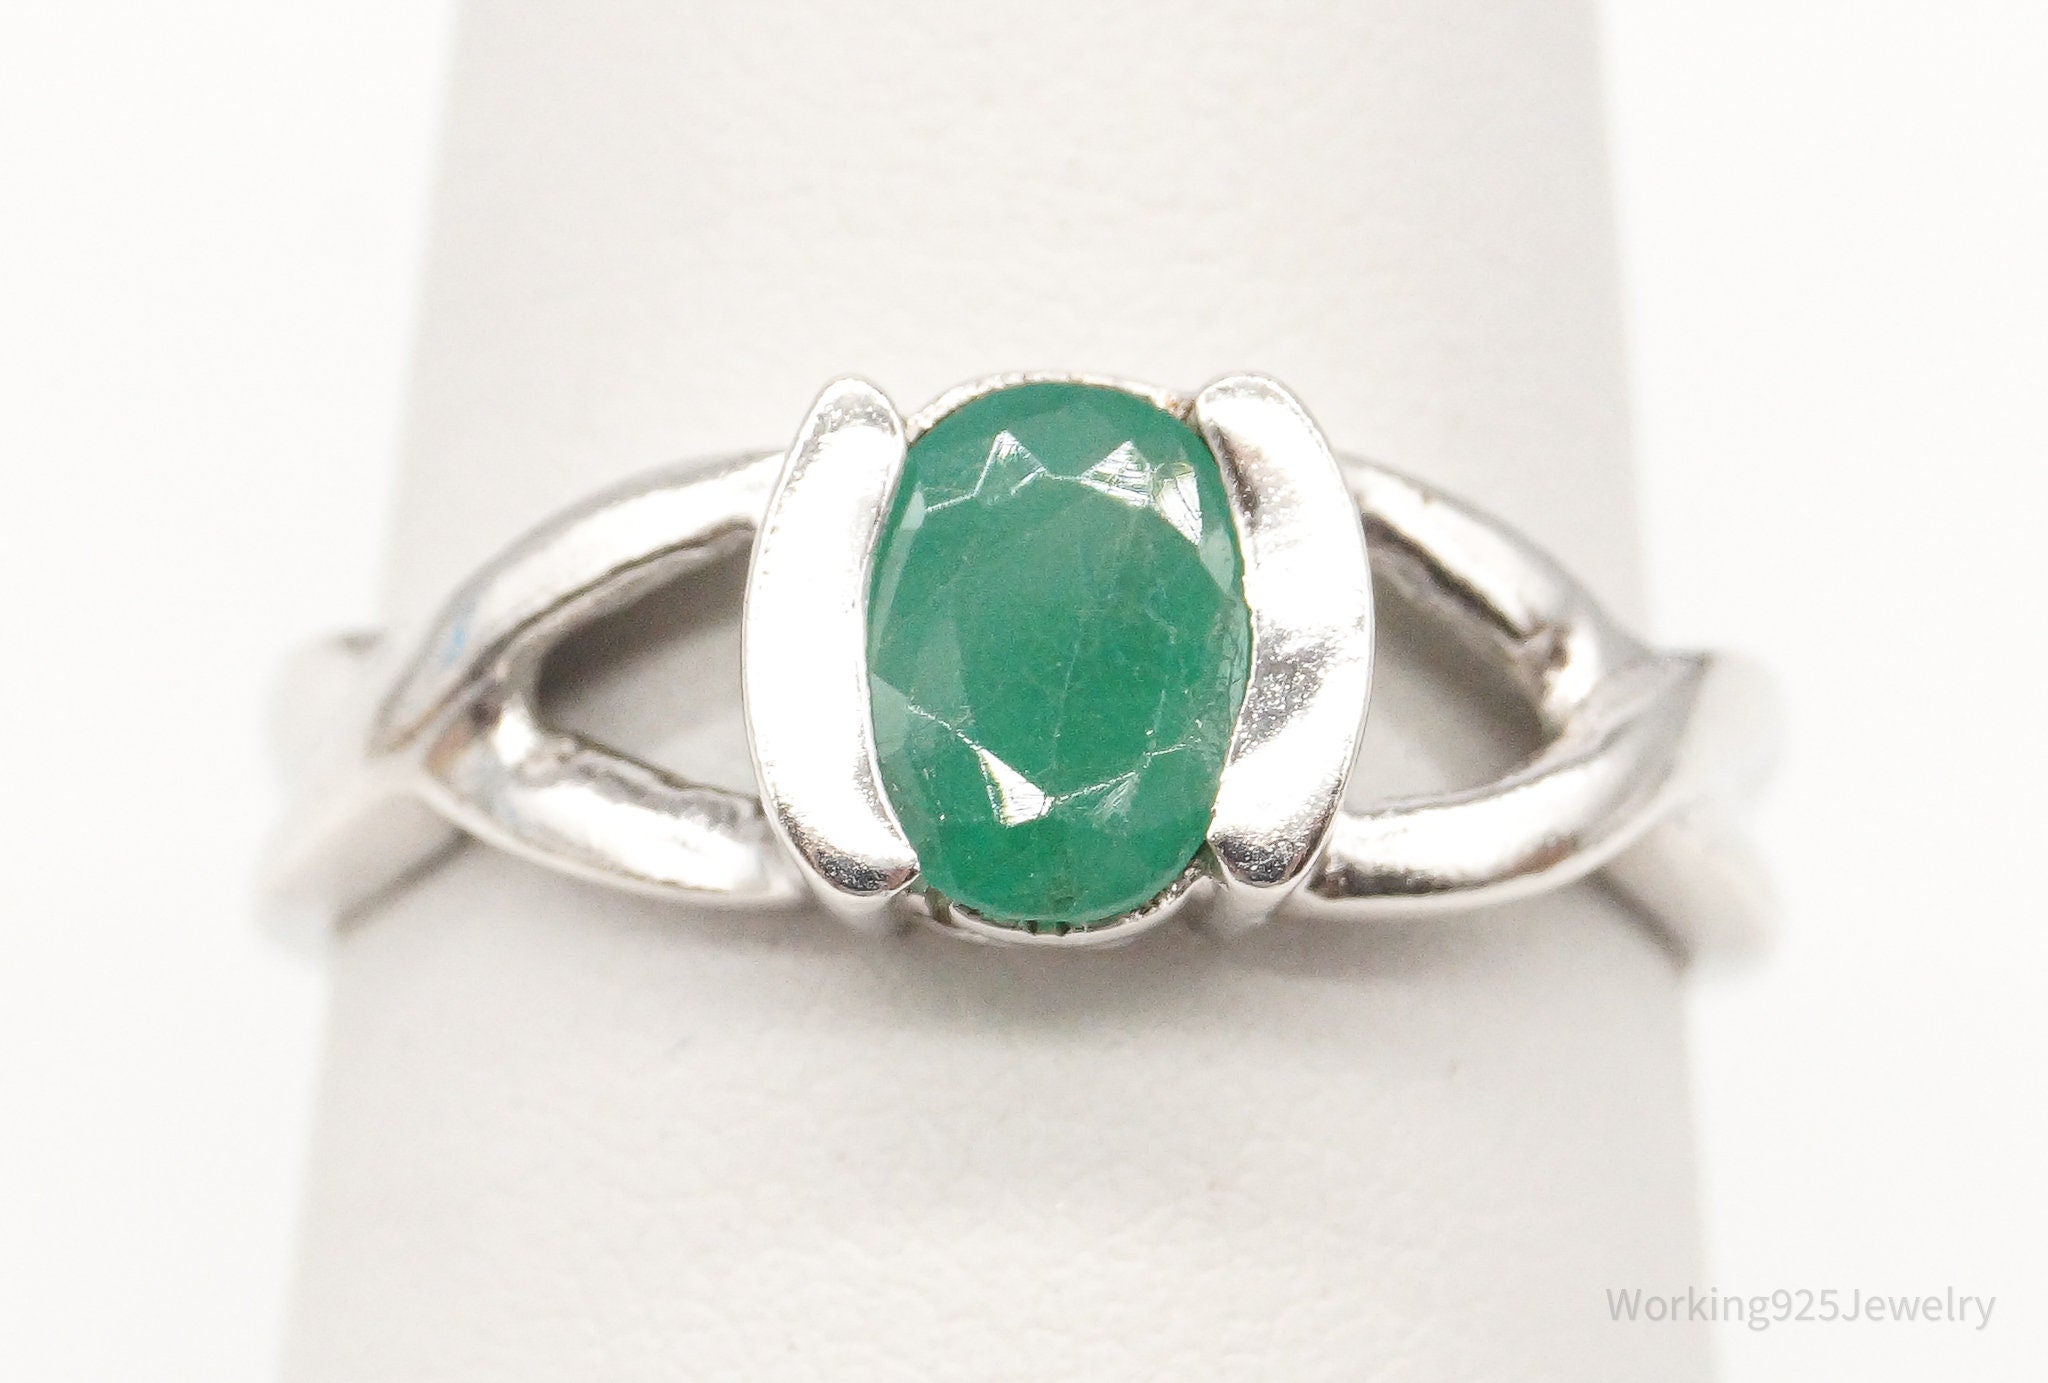 Vintage Emerald Sterling Silver Ring - Size 6.75